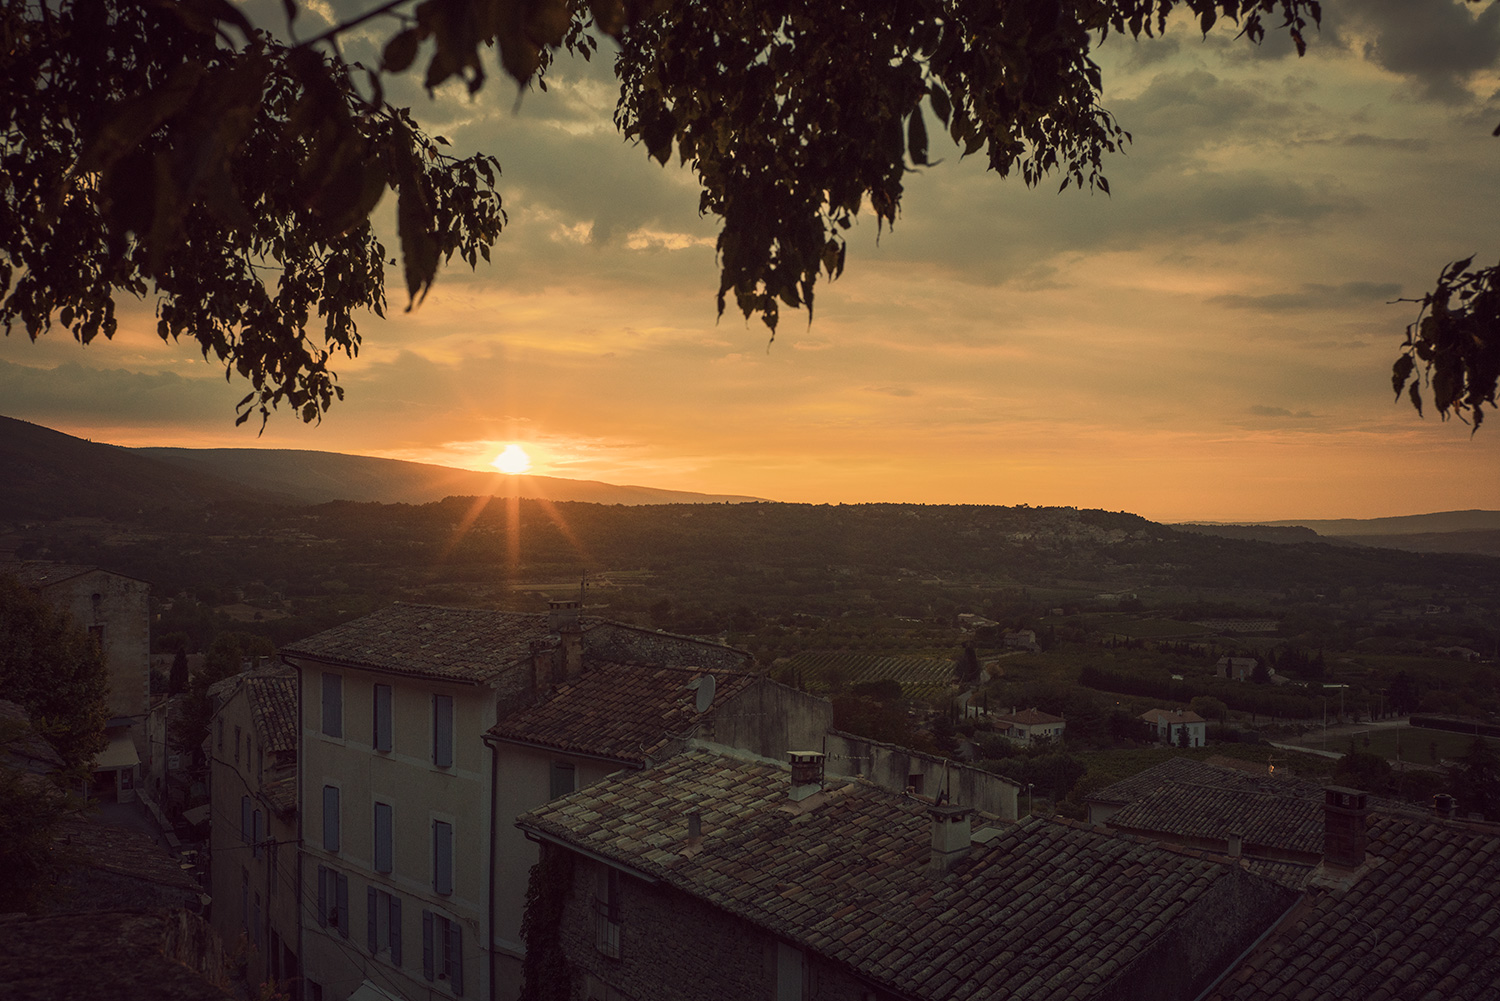 Sunset vista from the small Provencal town of Bonnieux, France